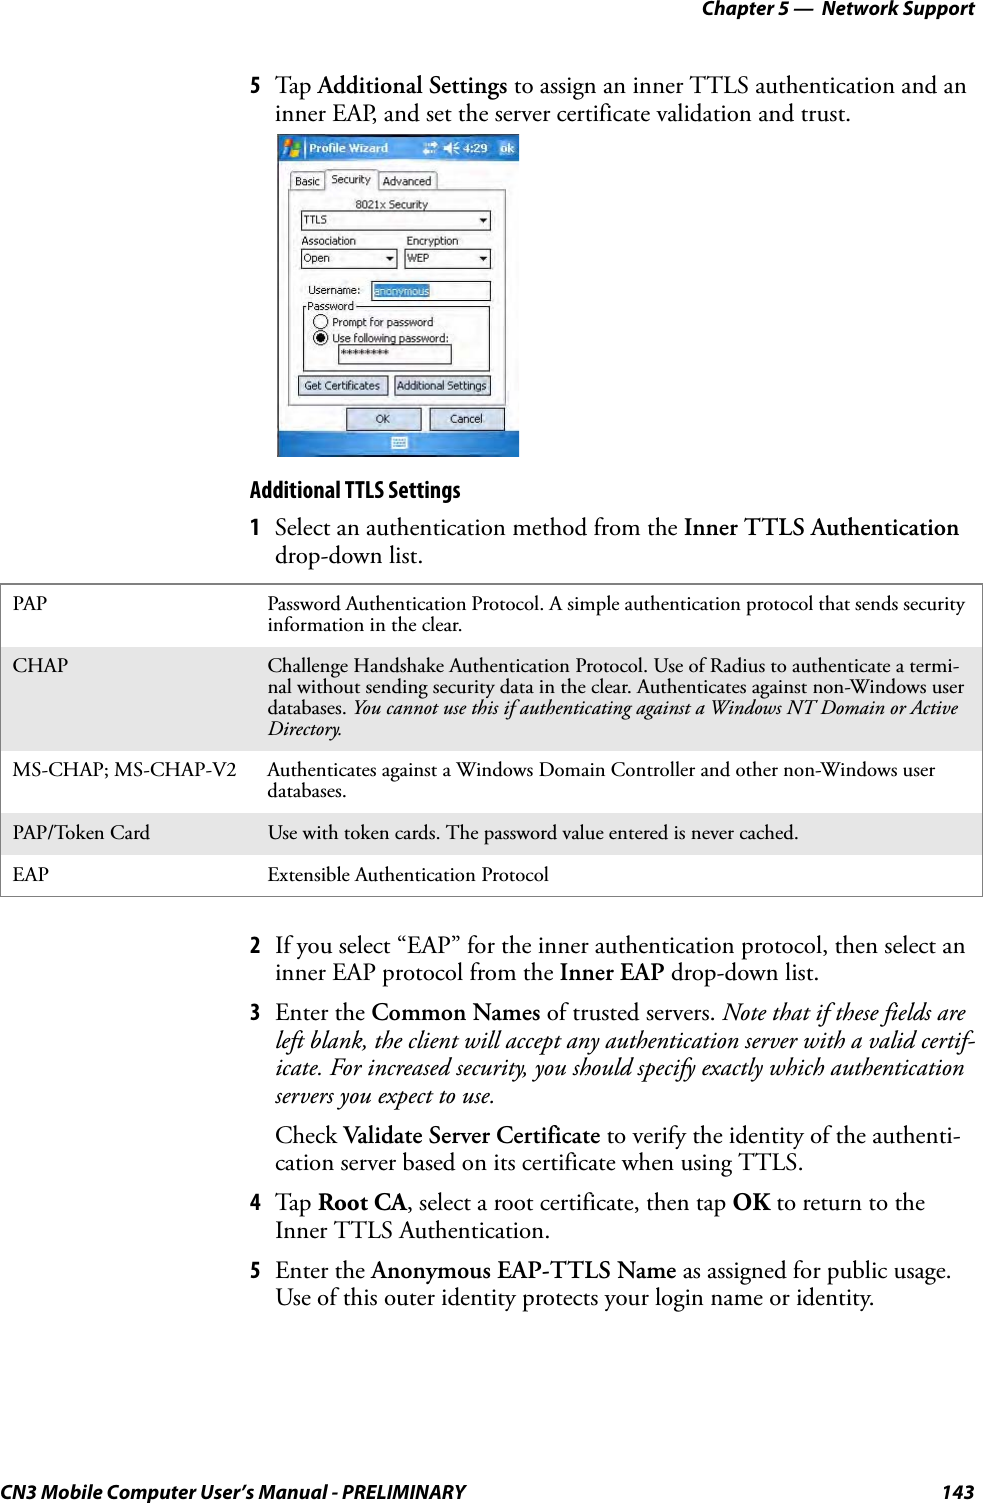 Chapter 5 —  Network SupportCN3 Mobile Computer User’s Manual - PRELIMINARY 1435Tap Additional Settings to assign an inner TTLS authentication and an inner EAP, and set the server certificate validation and trust.Additional TTLS Settings1Select an authentication method from the Inner TTLS Authentication drop-down list.2If you select “EAP” for the inner authentication protocol, then select an inner EAP protocol from the Inner EAP drop-down list.3Enter the Common Names of trusted servers. Note that if these fields are left blank, the client will accept any authentication server with a valid certif-icate. For increased security, you should specify exactly which authentication servers you expect to use.Check Validate Server Certificate to verify the identity of the authenti-cation server based on its certificate when using TTLS.4Tap Root CA, select a root certificate, then tap OK to return to the Inner TTLS Authentication.5Enter the Anonymous EAP-TTLS Name as assigned for public usage. Use of this outer identity protects your login name or identity.PAP Password Authentication Protocol. A simple authentication protocol that sends security information in the clear.CHAP Challenge Handshake Authentication Protocol. Use of Radius to authenticate a termi-nal without sending security data in the clear. Authenticates against non-Windows user databases. You cannot use this if authenticating against a Windows NT Domain or Active Directory.MS-CHAP; MS-CHAP-V2 Authenticates against a Windows Domain Controller and other non-Windows user databases.PAP/Token Card Use with token cards. The password value entered is never cached.EAP Extensible Authentication Protocol